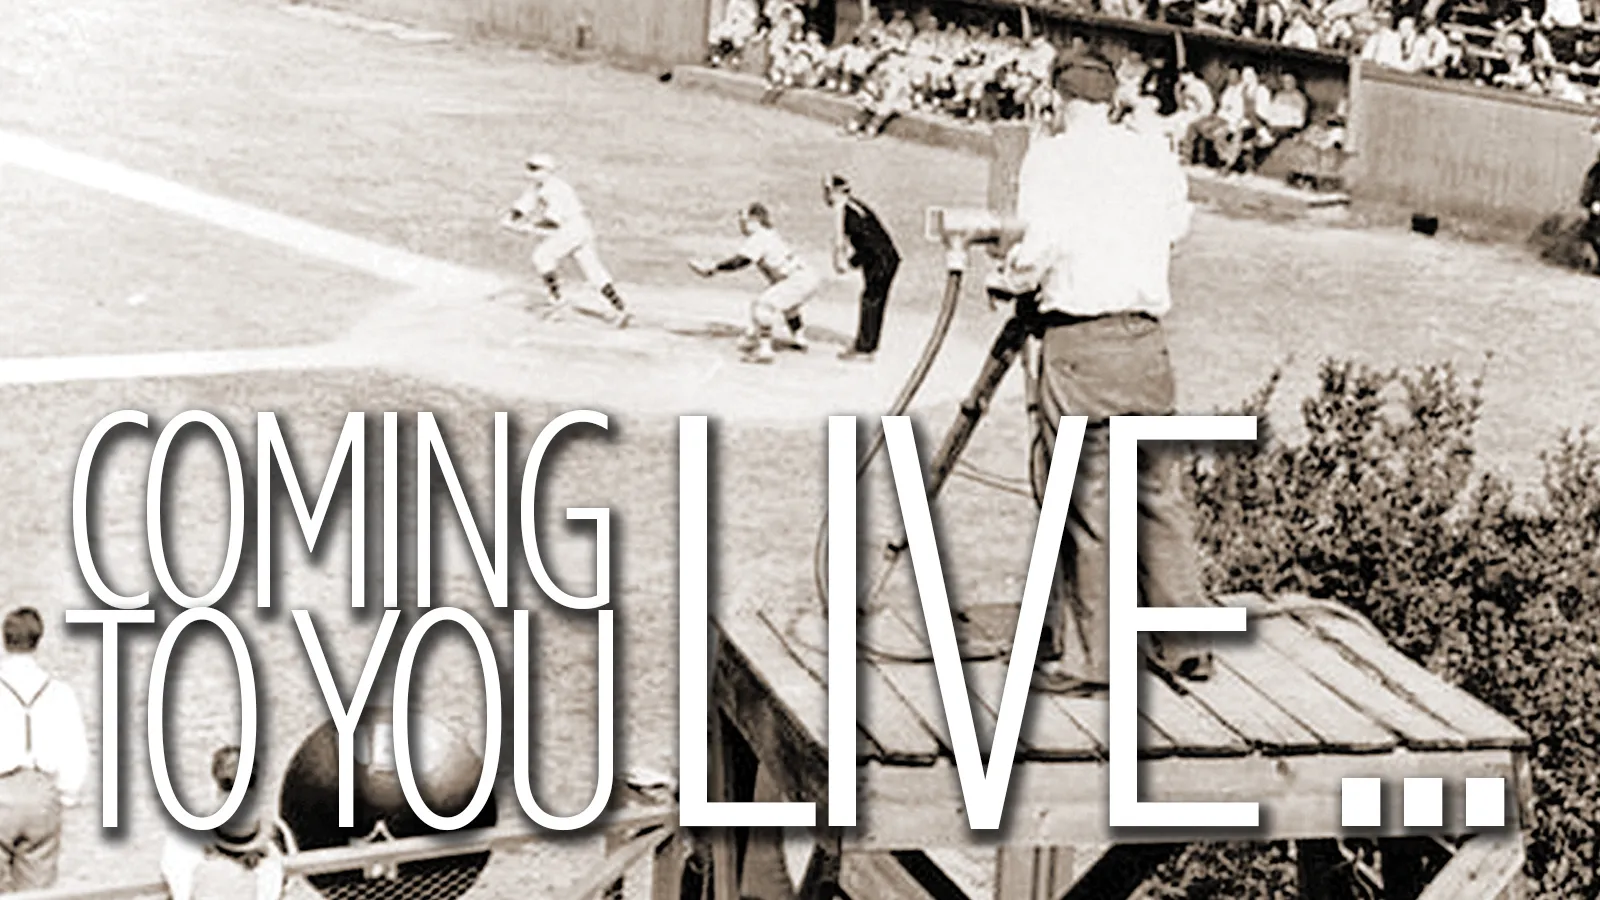 A photo taken of the first recording of a college baseball game! Several players play ball, under the foreground of a large camera recording them. The header caption over the image reads 'Coming to you live'